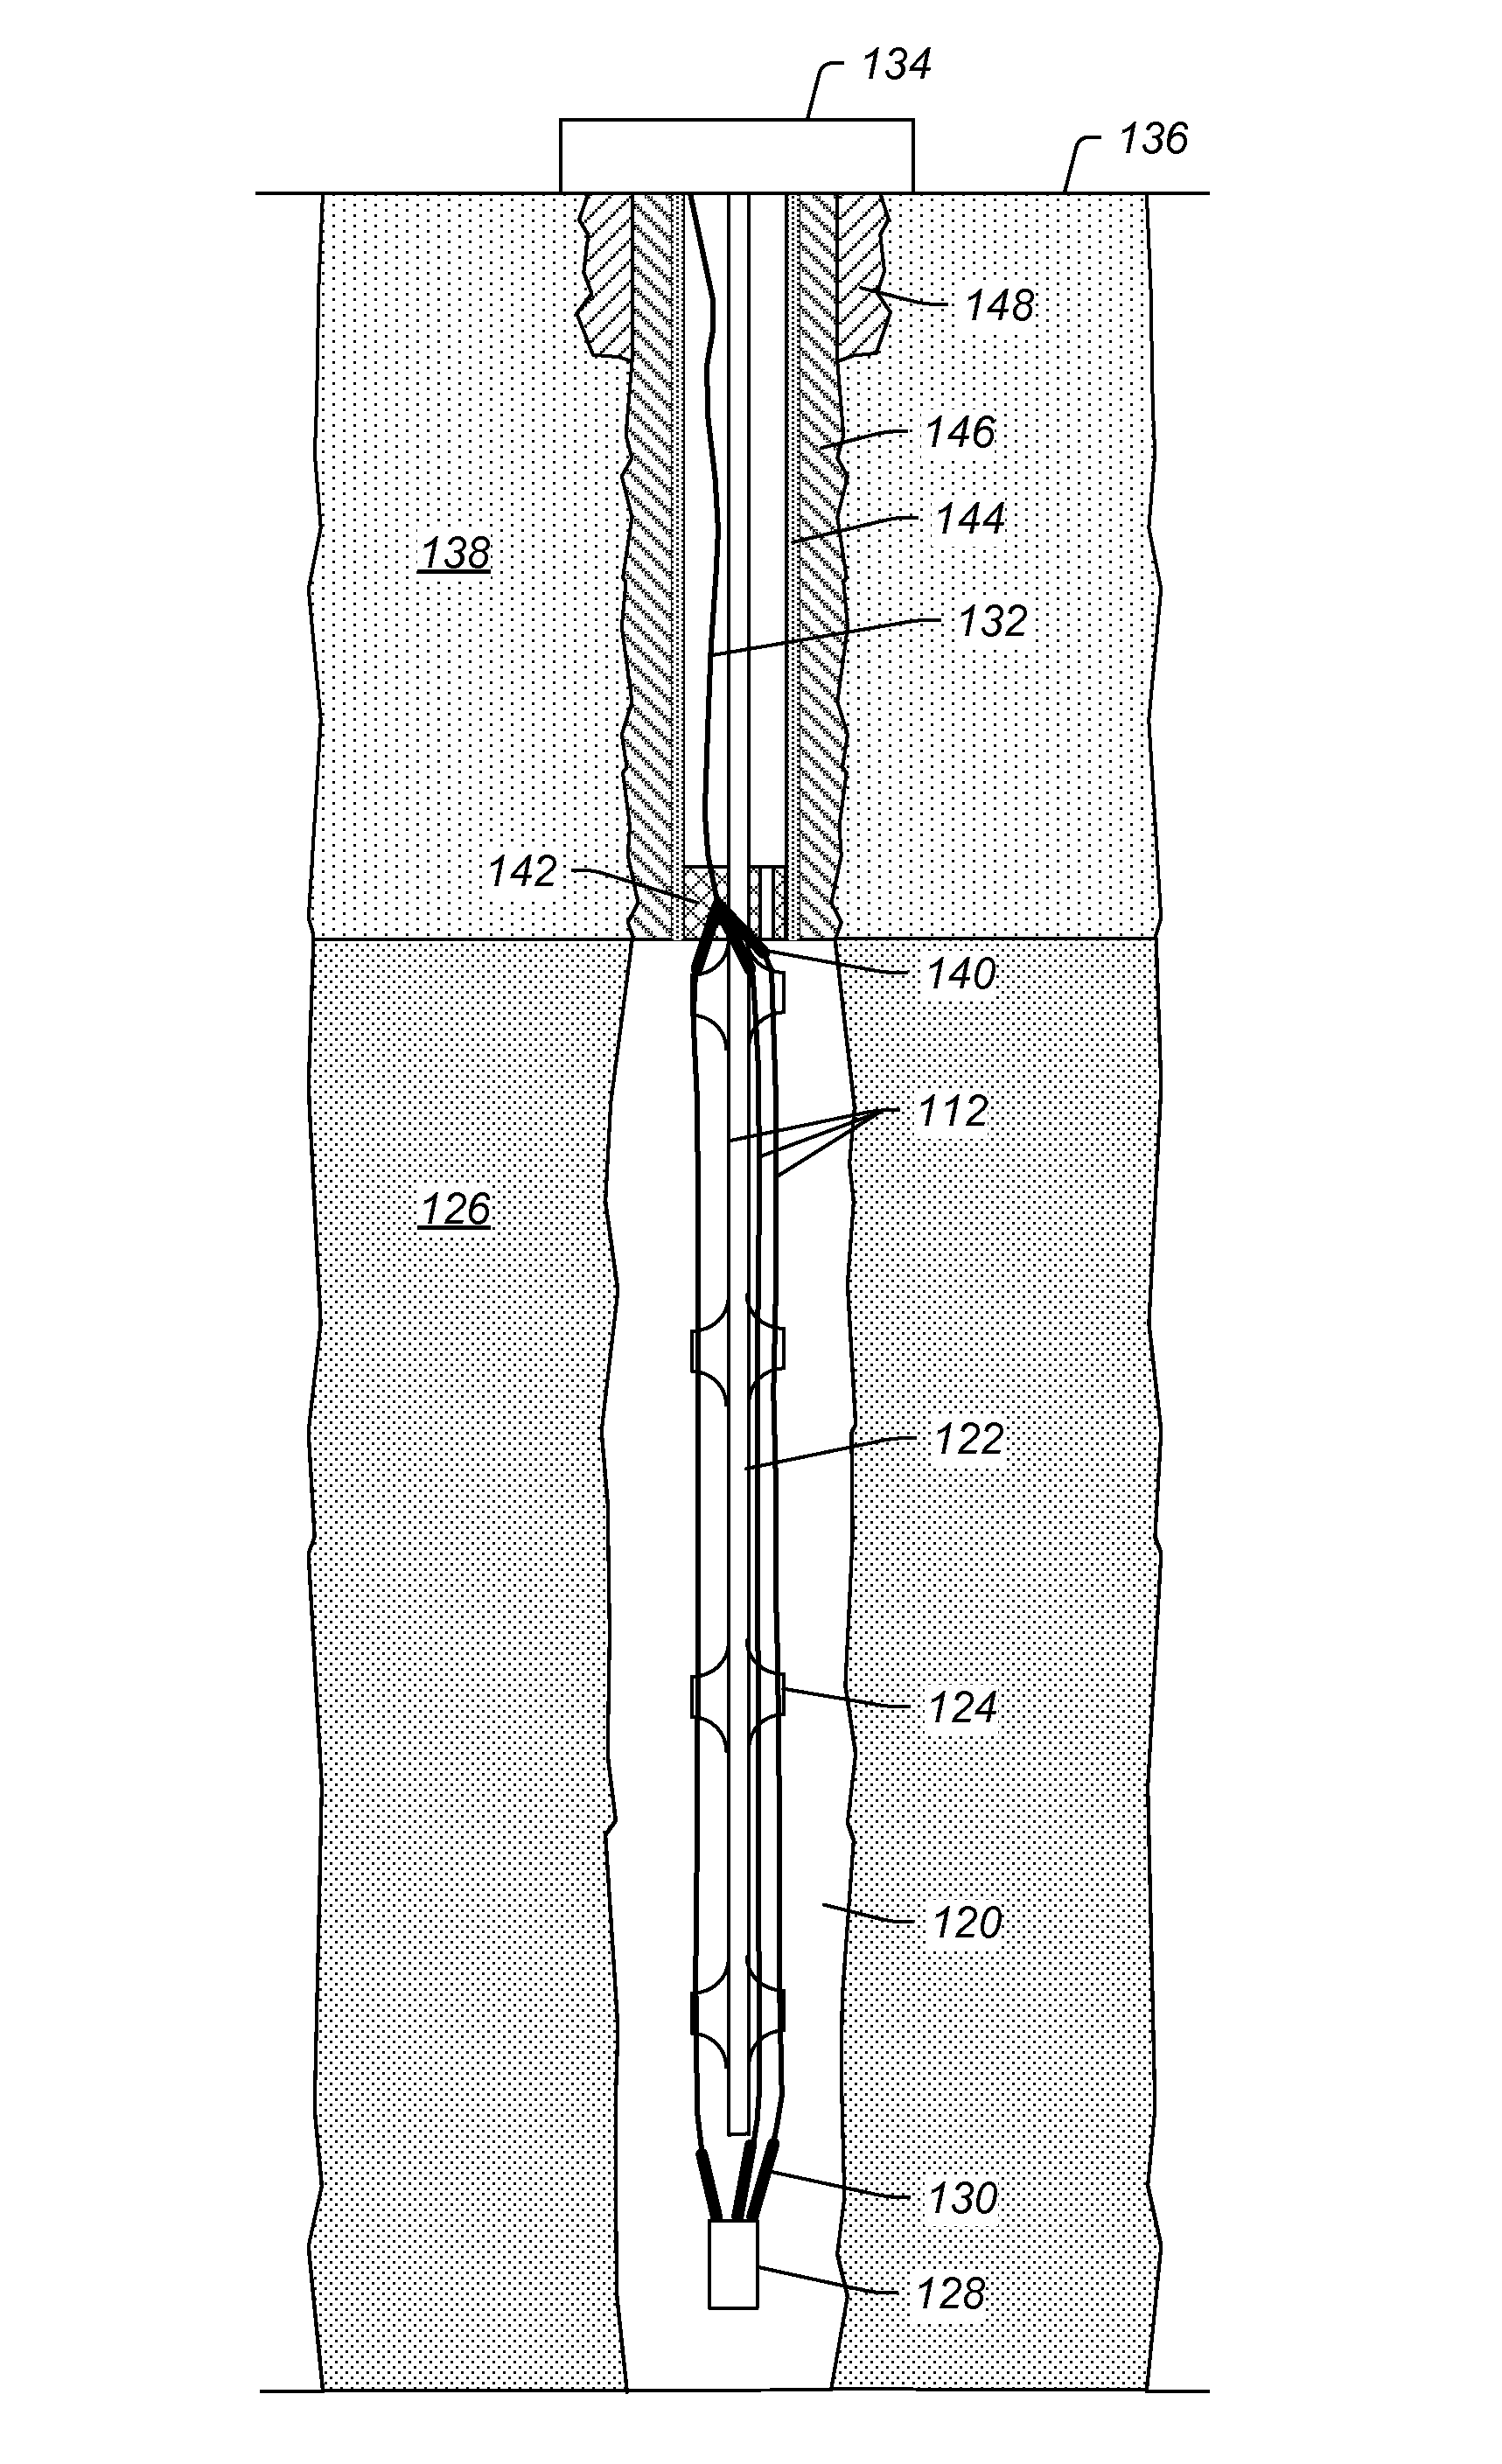 Methods for assessing a temperature in a subsurface formation